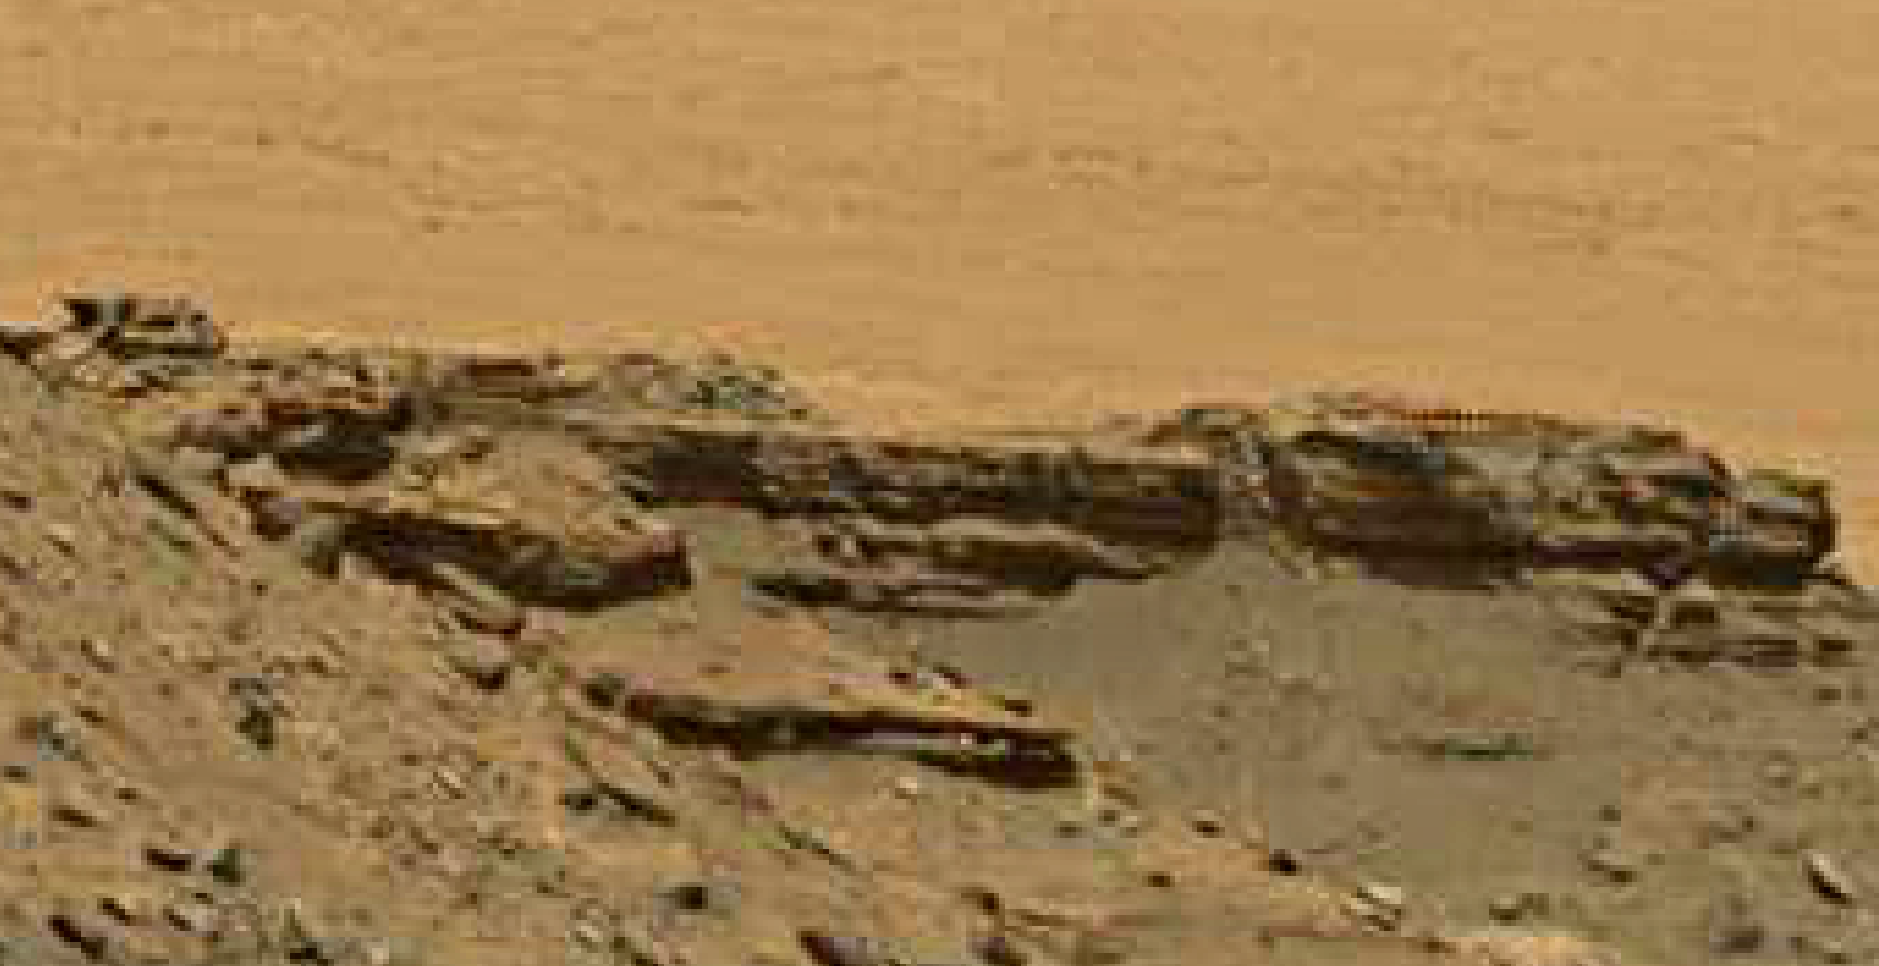 mars sol 1447 anomaly artifacts 4 -bird-plane-butte - was life on mars